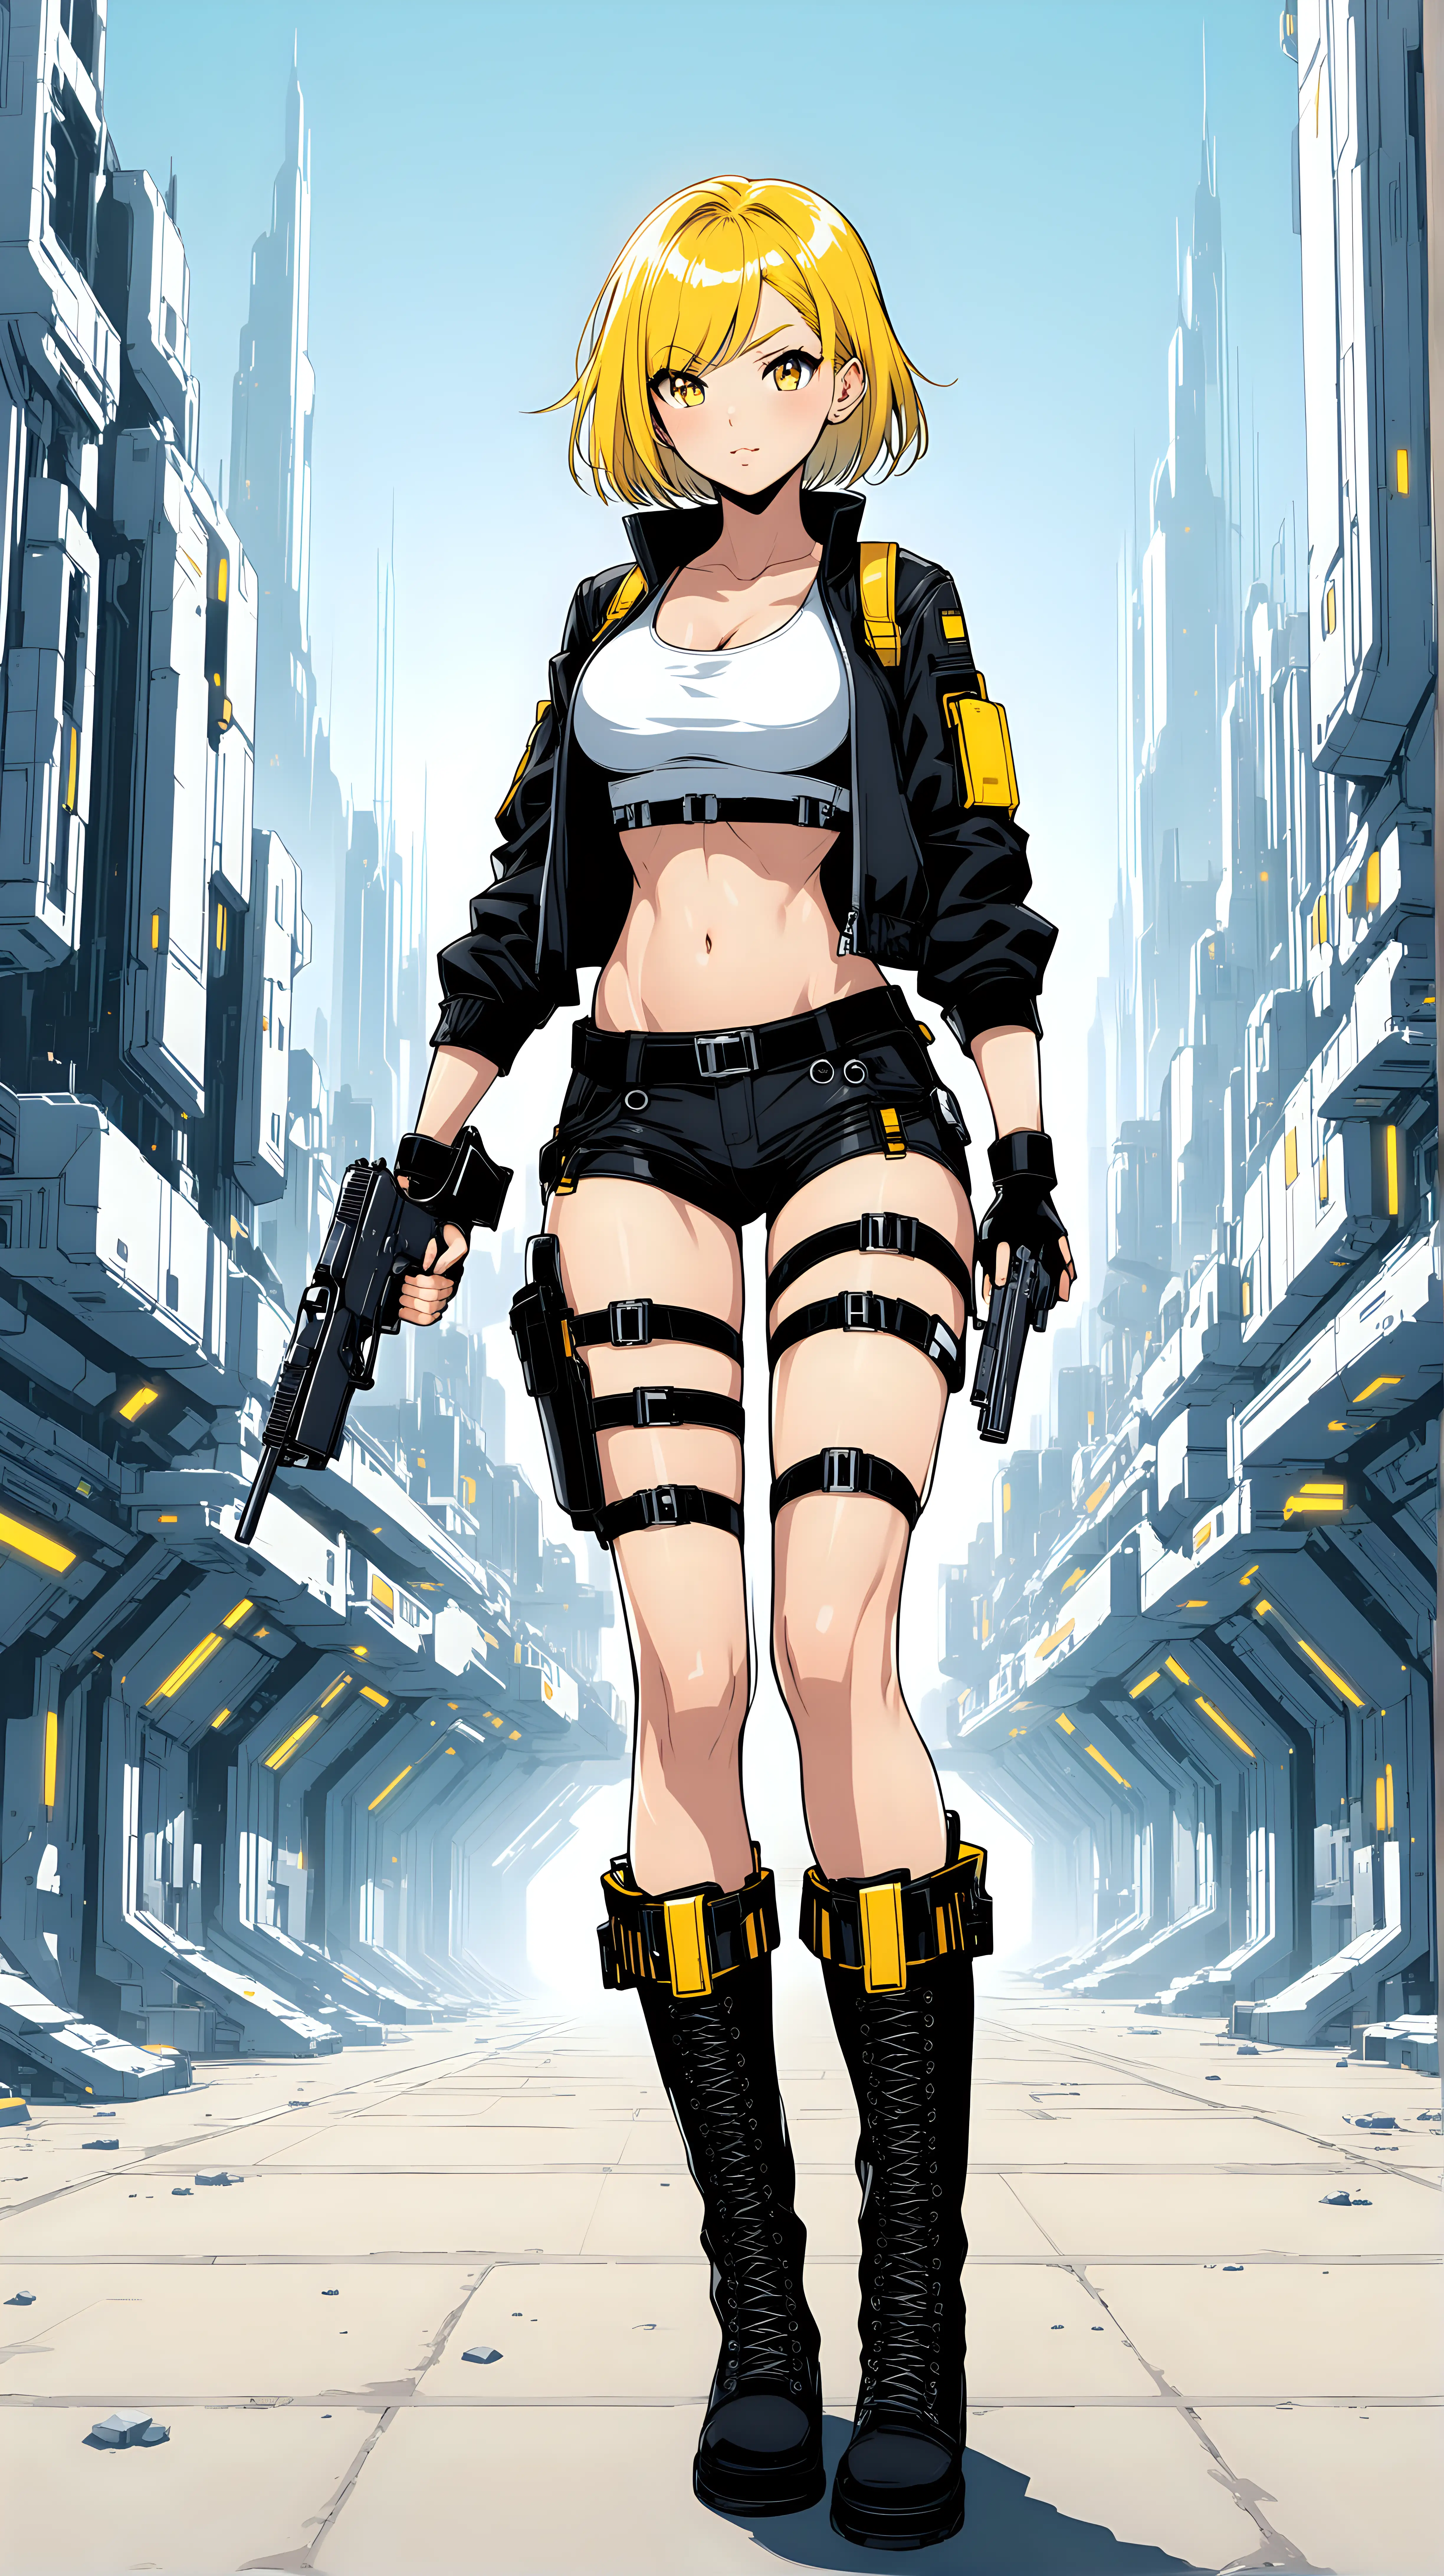 sexy fit 24 year old hero girl, short chin length yellow hair, posing with handguns in futuristic town, toned body, wearing black members only jacket, short white tank top, sexy midriff, wearing suspenders, holsters on each thigh, combat boots, yellow black white 3 color minimal design